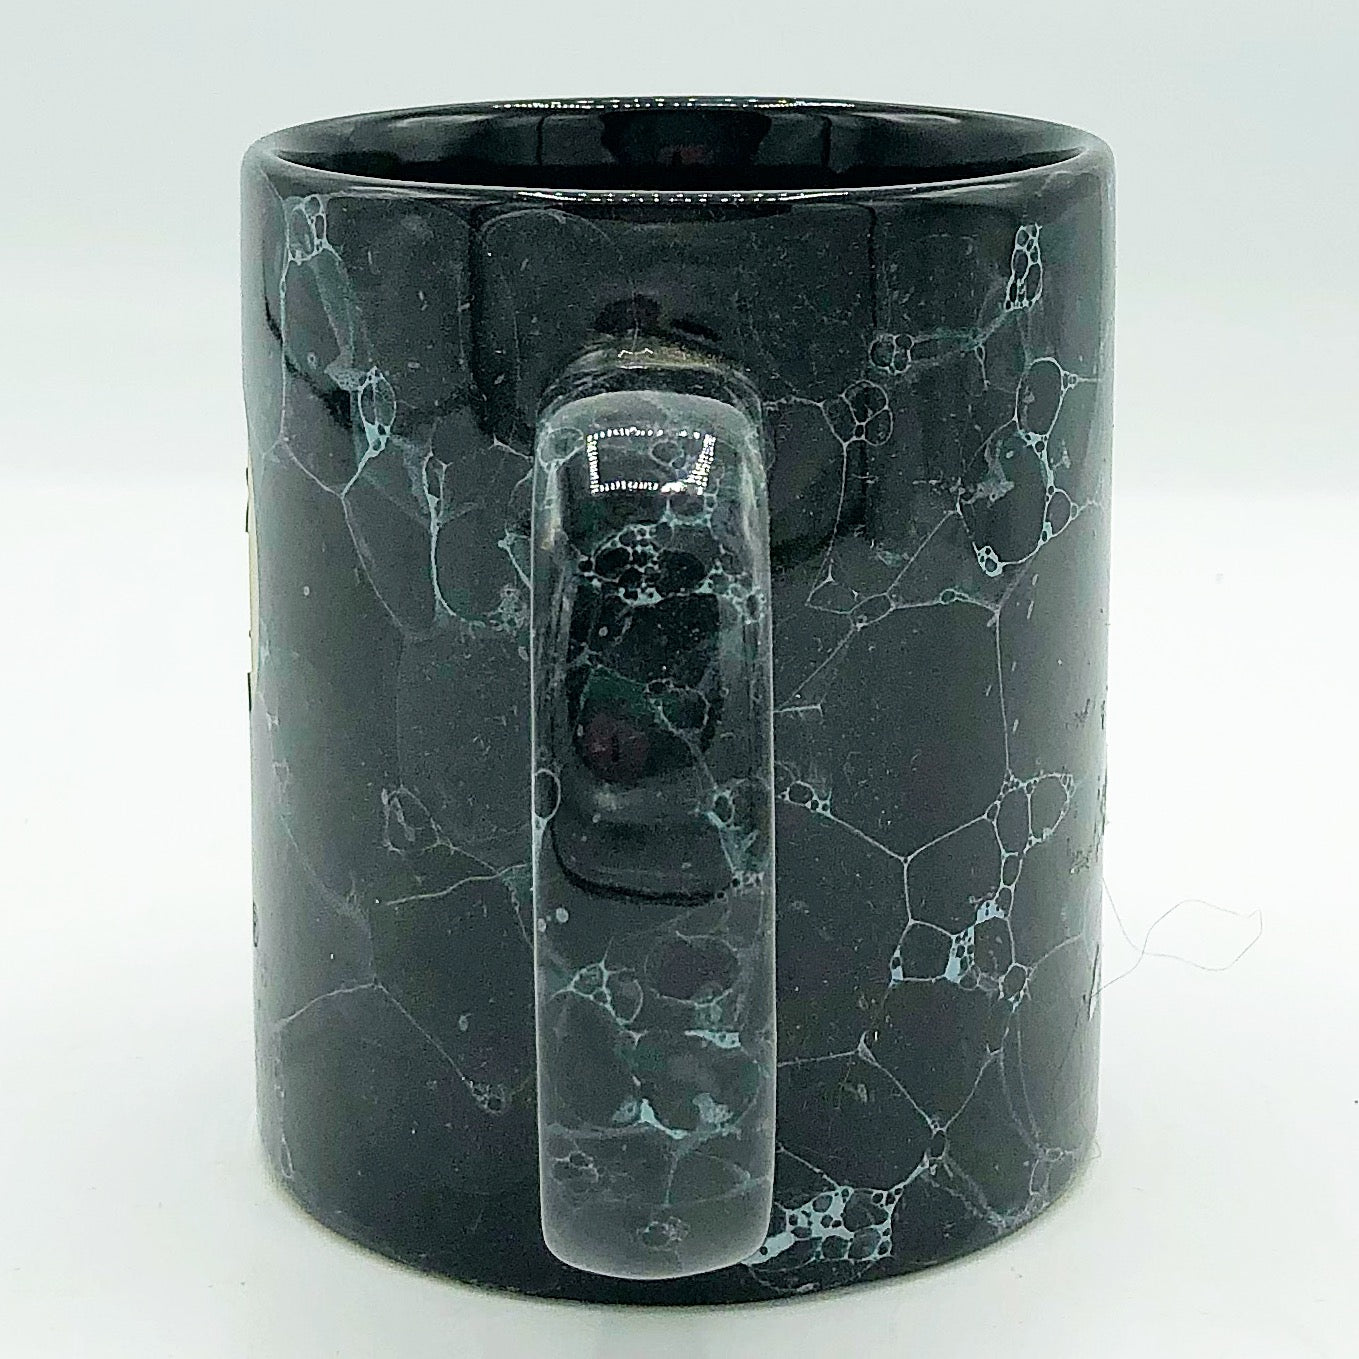 Squirrel Marble Style Color Craft Mug